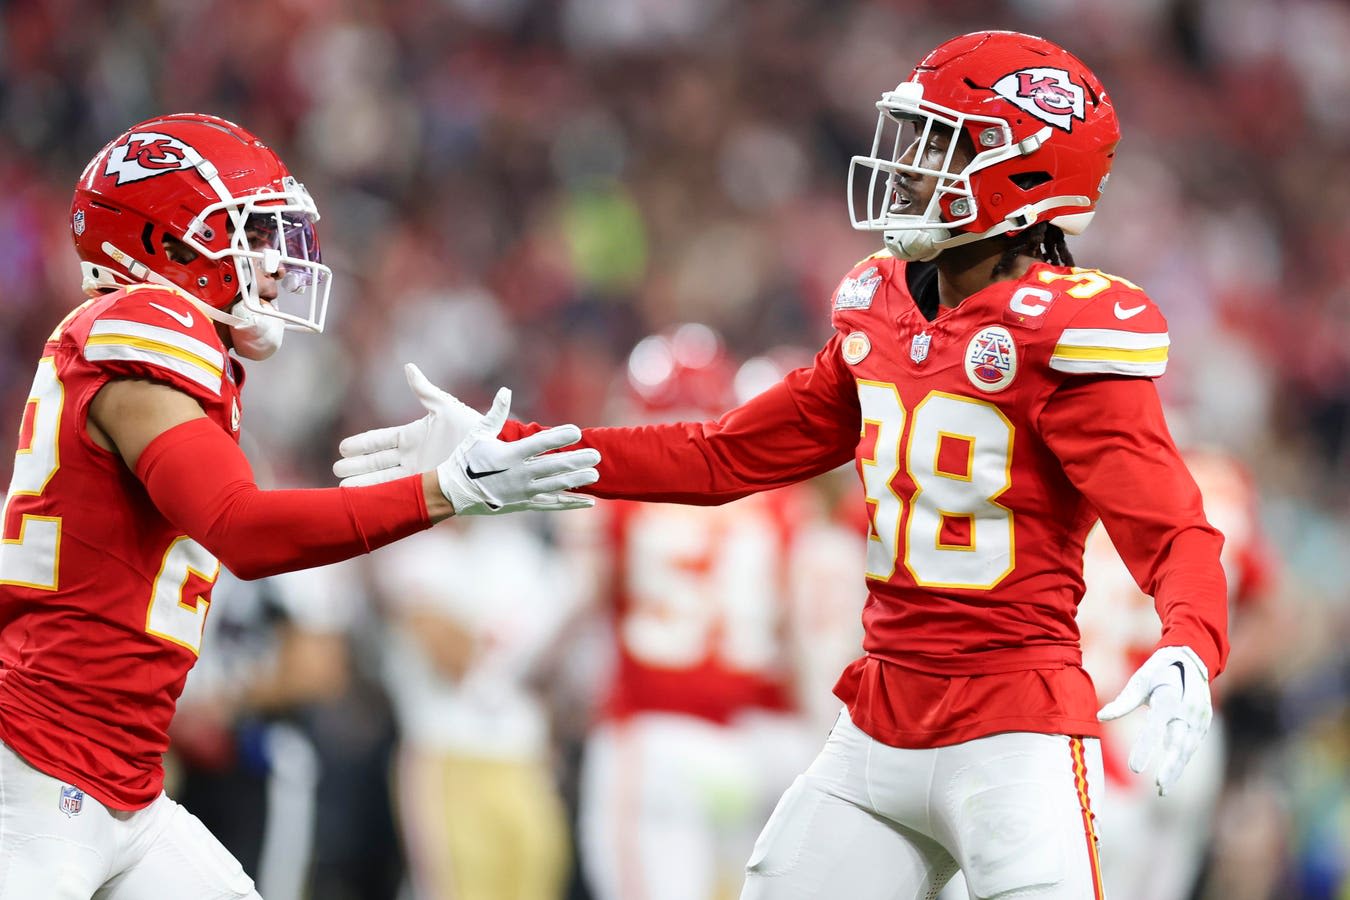 How The Role Of Chiefs All-Pro Trent McDuffie Will Change Without L’Jarius Sneed